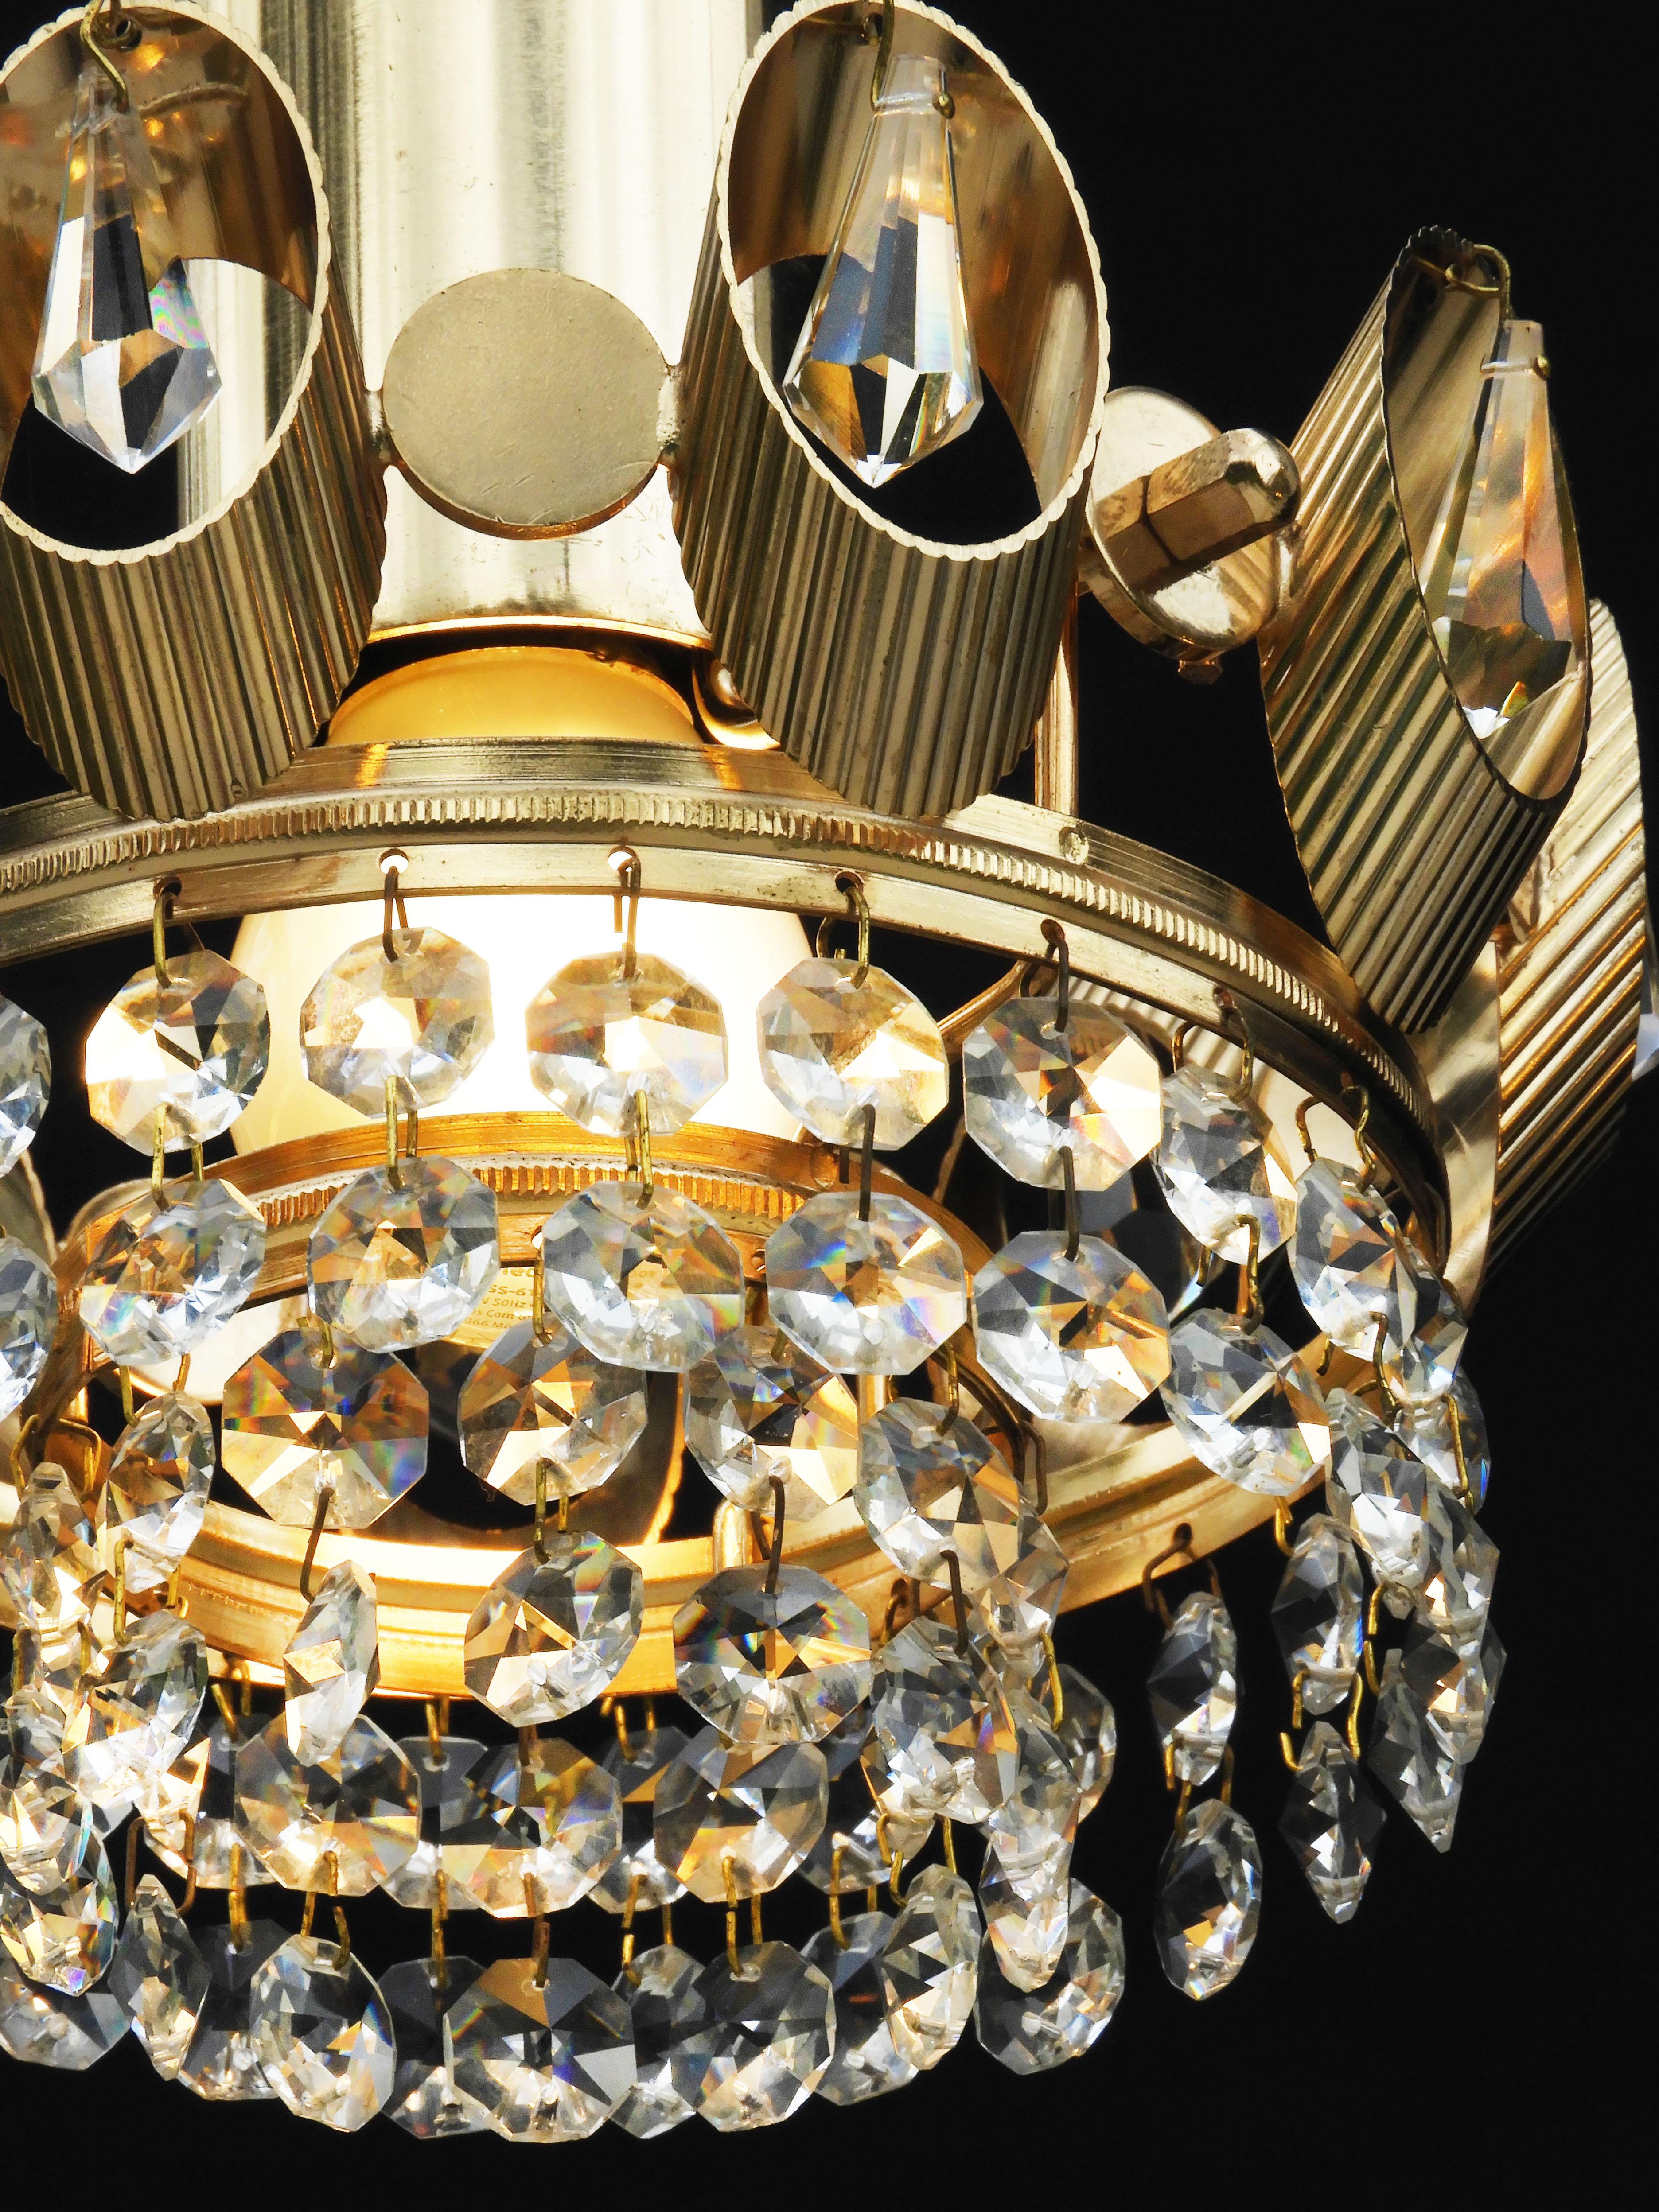 20th Century Palwa Crown Pendant Light Chandeliers, C1970s, Germany, 3 Available For Sale